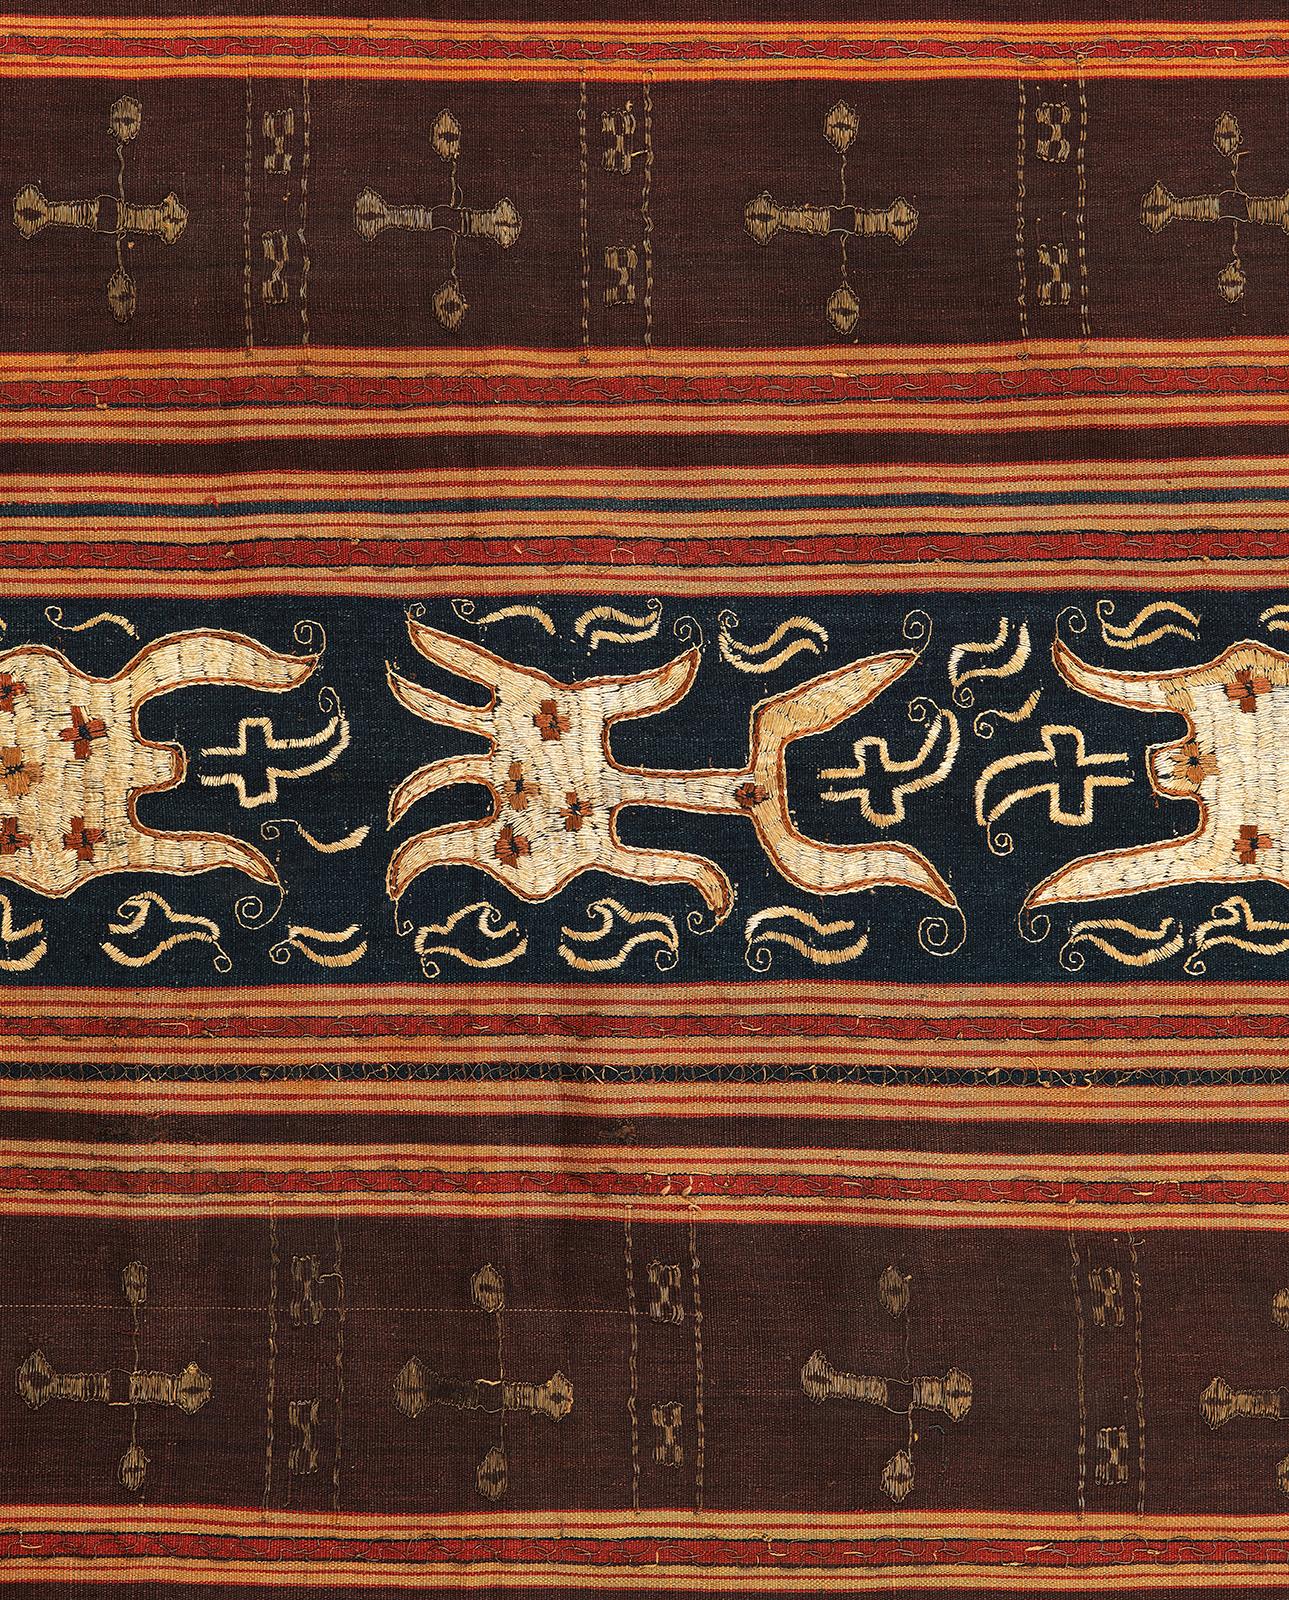 Tapis, Woman’s Ceremonial Skirt
Paminggir people, Lampung, Sumatra, Indonesia
Late 19th or early 20th century
Silk, metallic thread, handspun cotton, natural dyes, embroidery
48 x 48 inches  (120 x 120 cm)

The design shows large cumi cumi (squid)